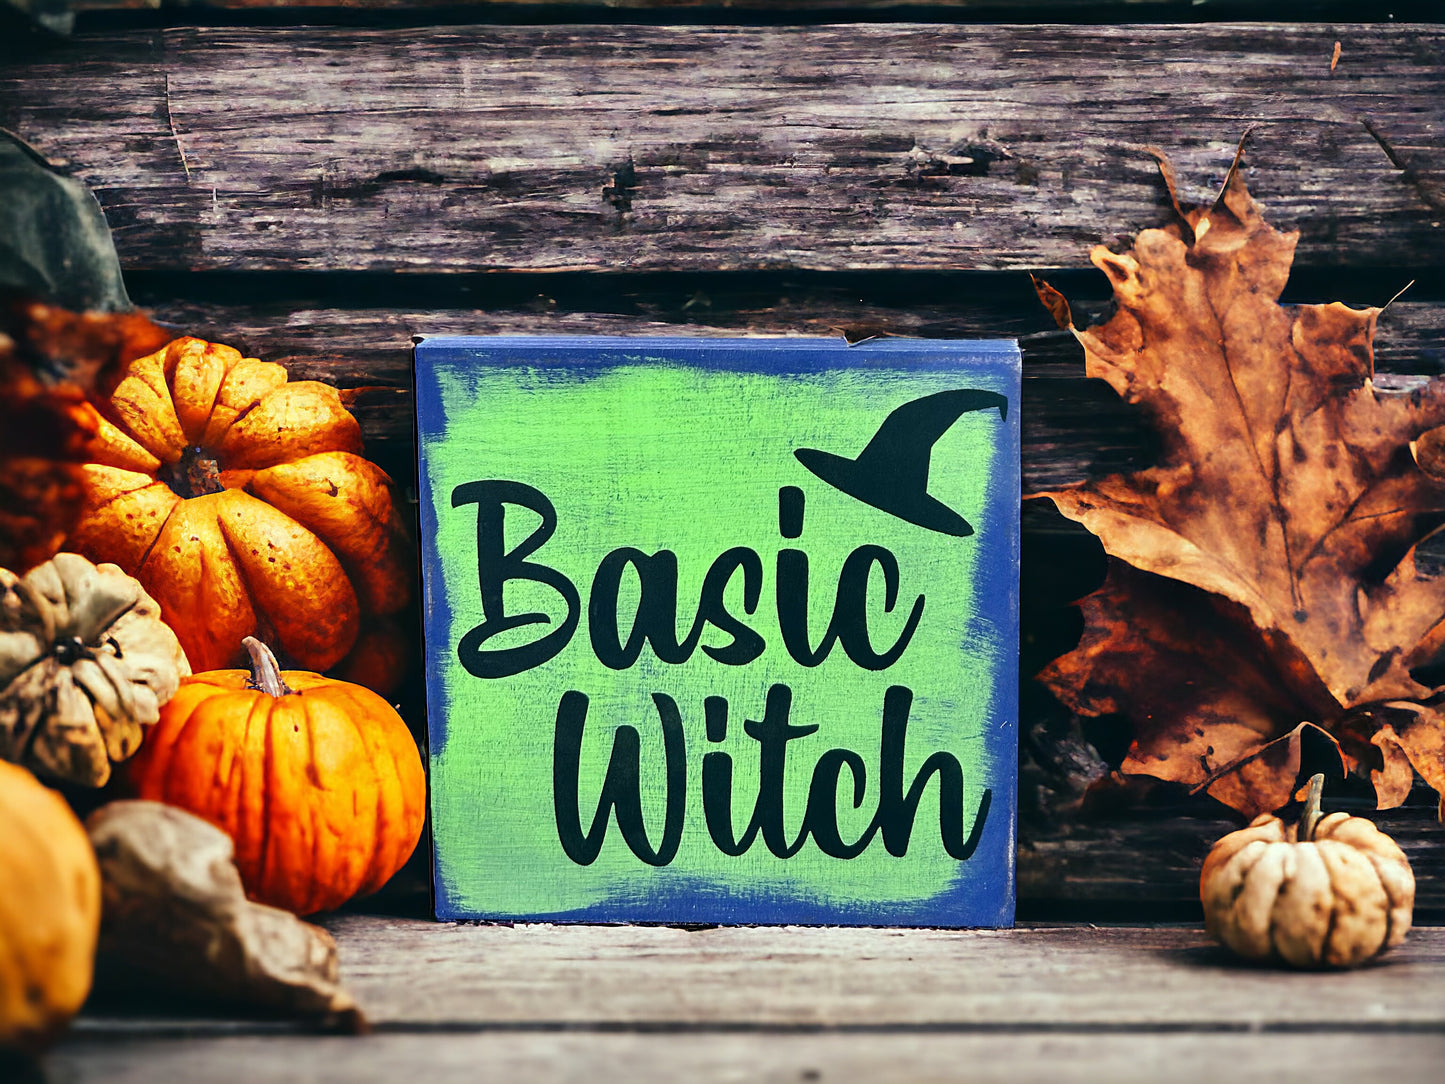 "Basic witch" wood sign